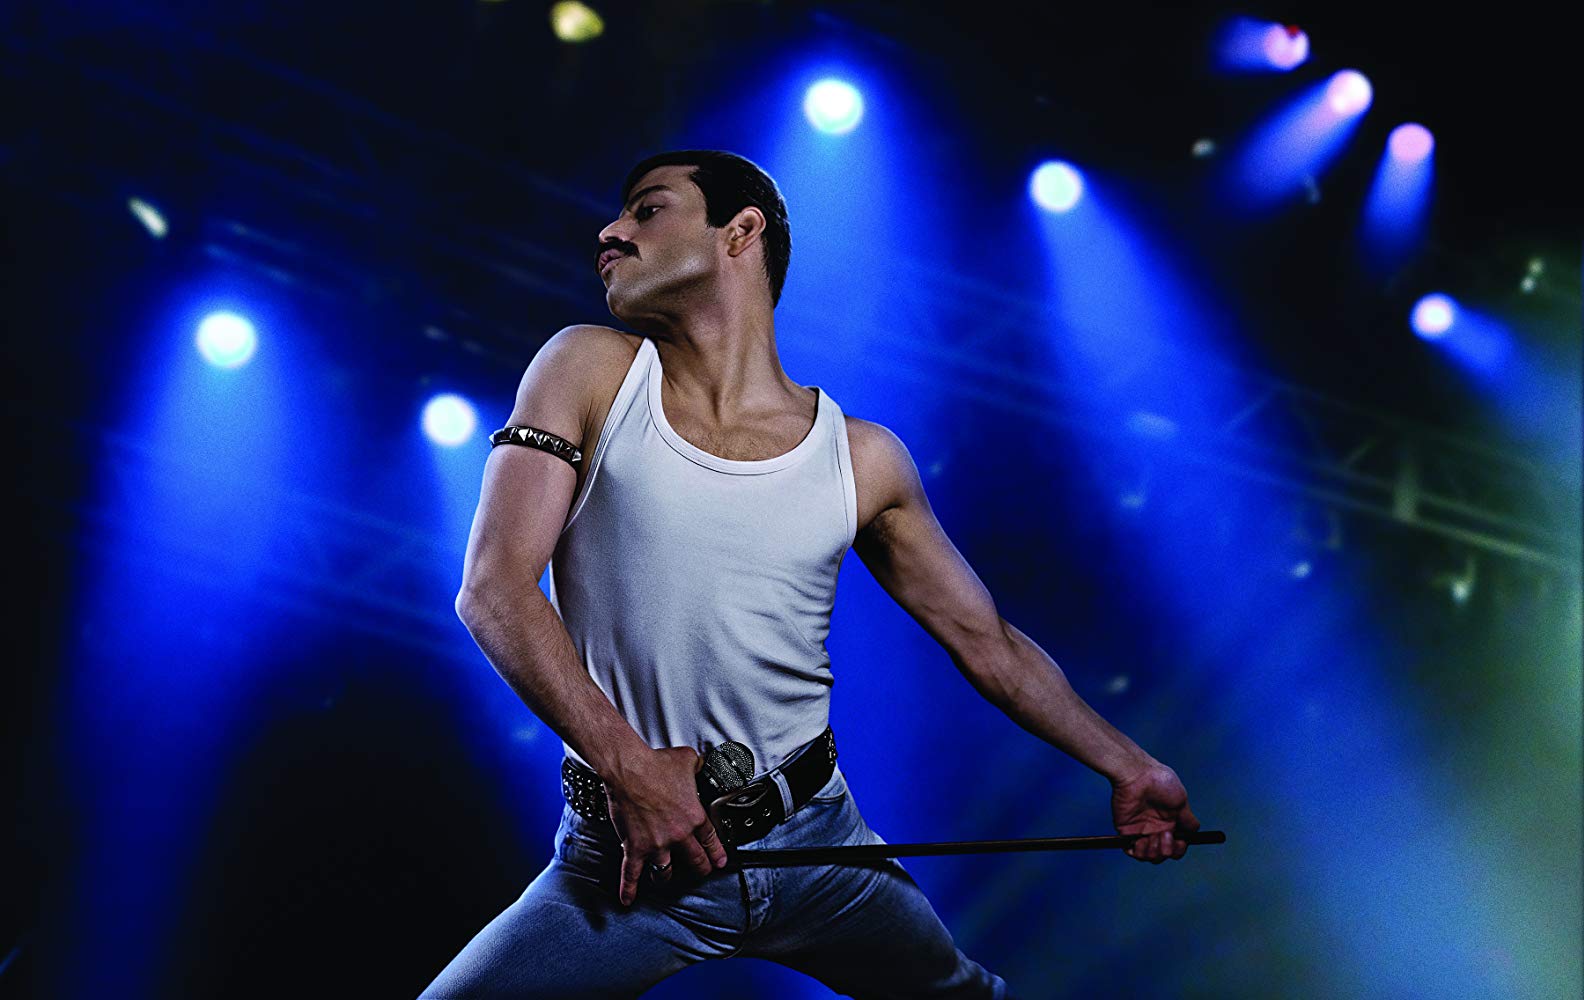 REVIEW: Bohemian Rhapsody: mixed feelings over the Queen biopic